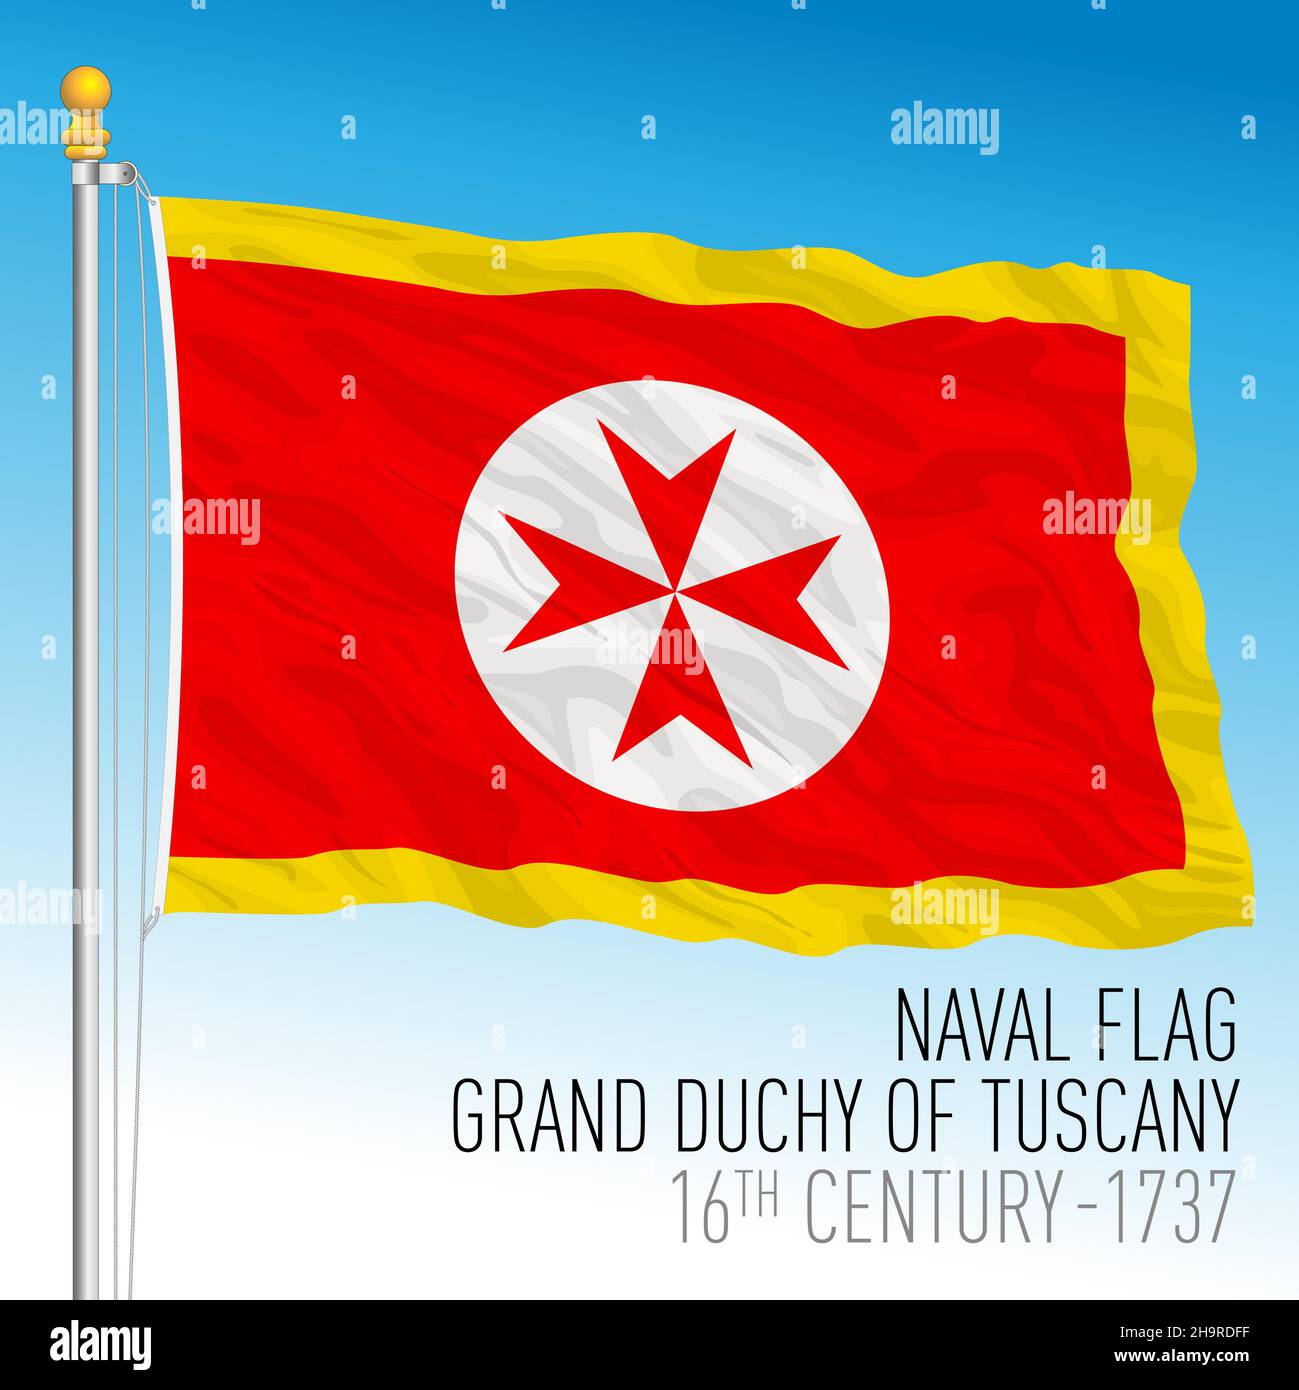 Grand Duchy of Tuscany, naval ensign historical flag, Italy, 16th century-1737, vector illustration Stock Vector